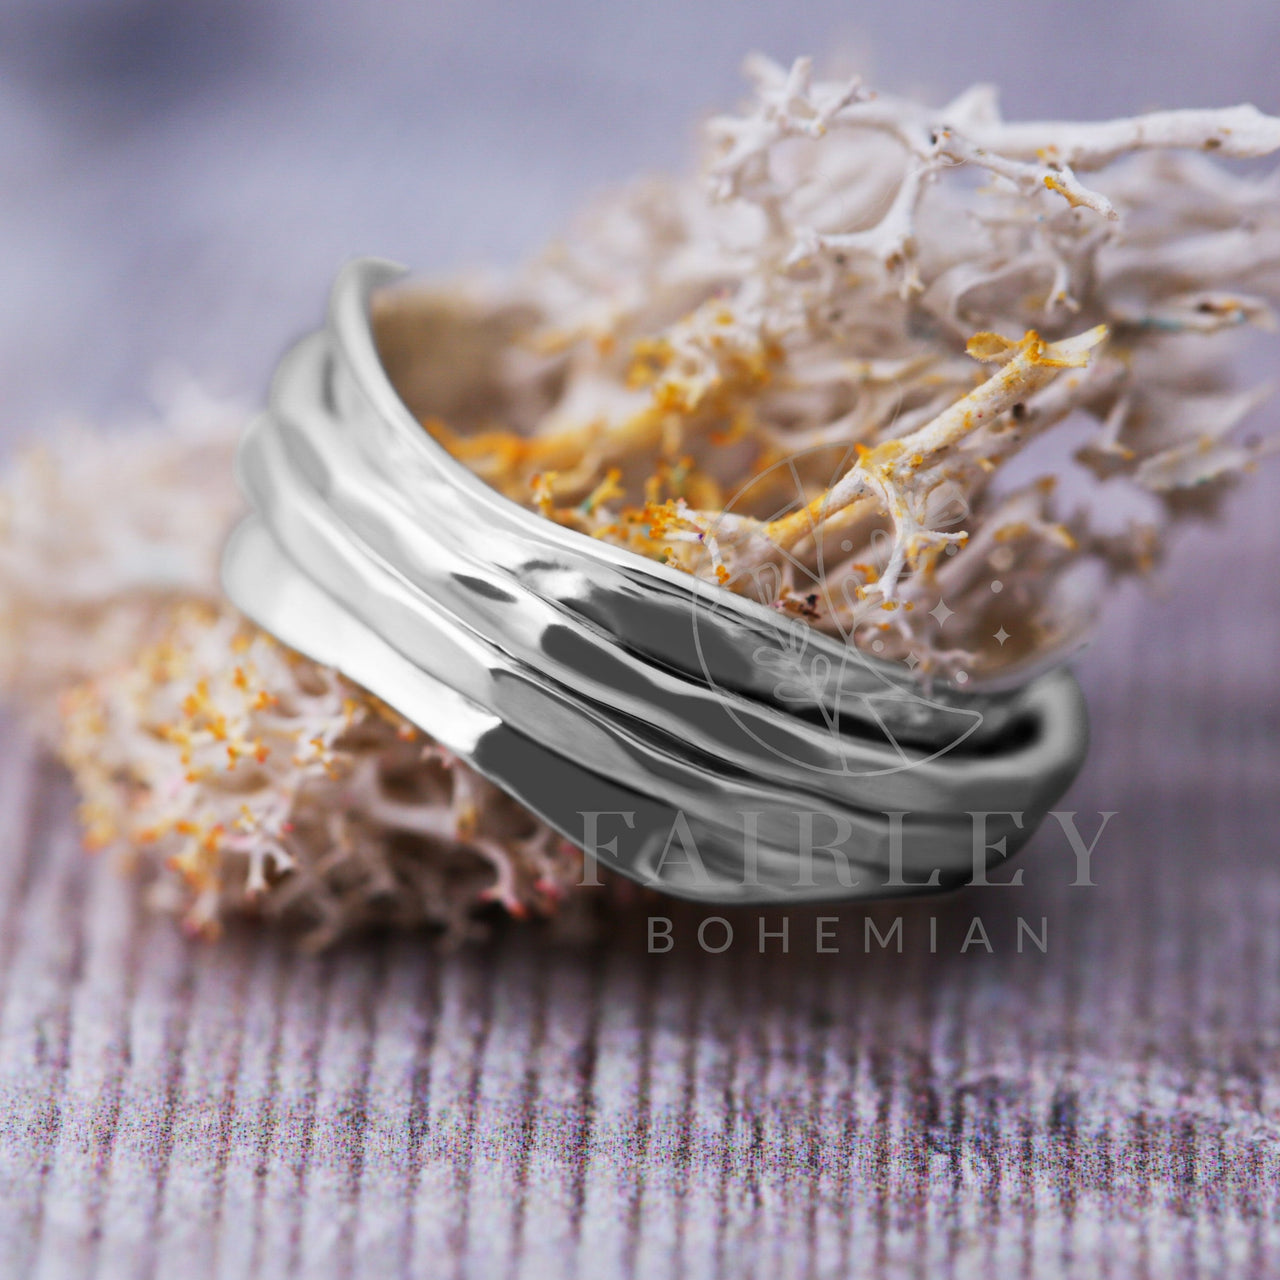 bohemian spinner ring solid silver 925 sterling spinning ring anxiety ring or fidget ring